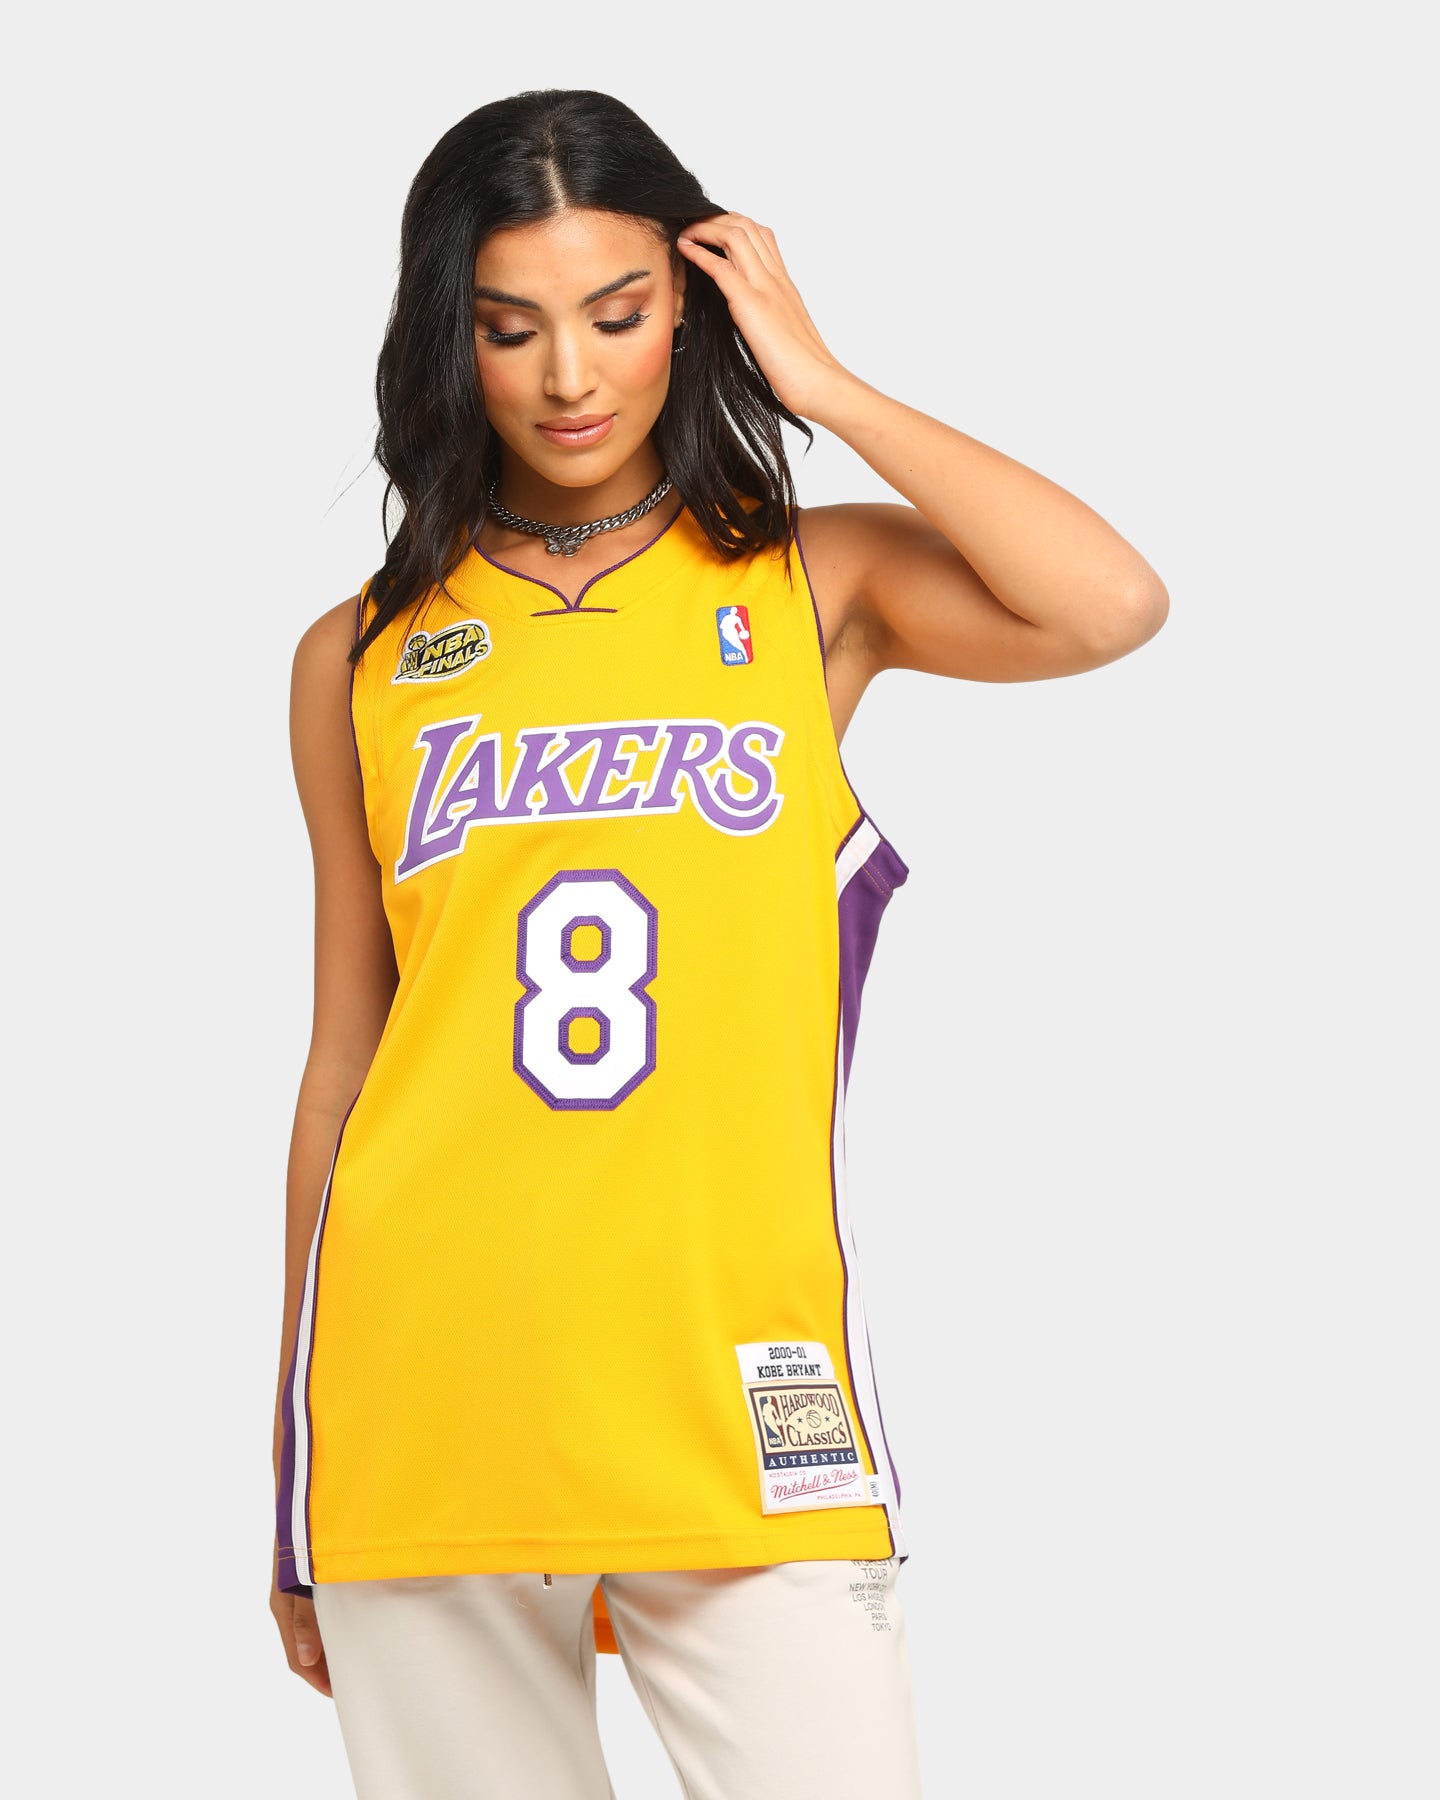 lakers jersey 2000